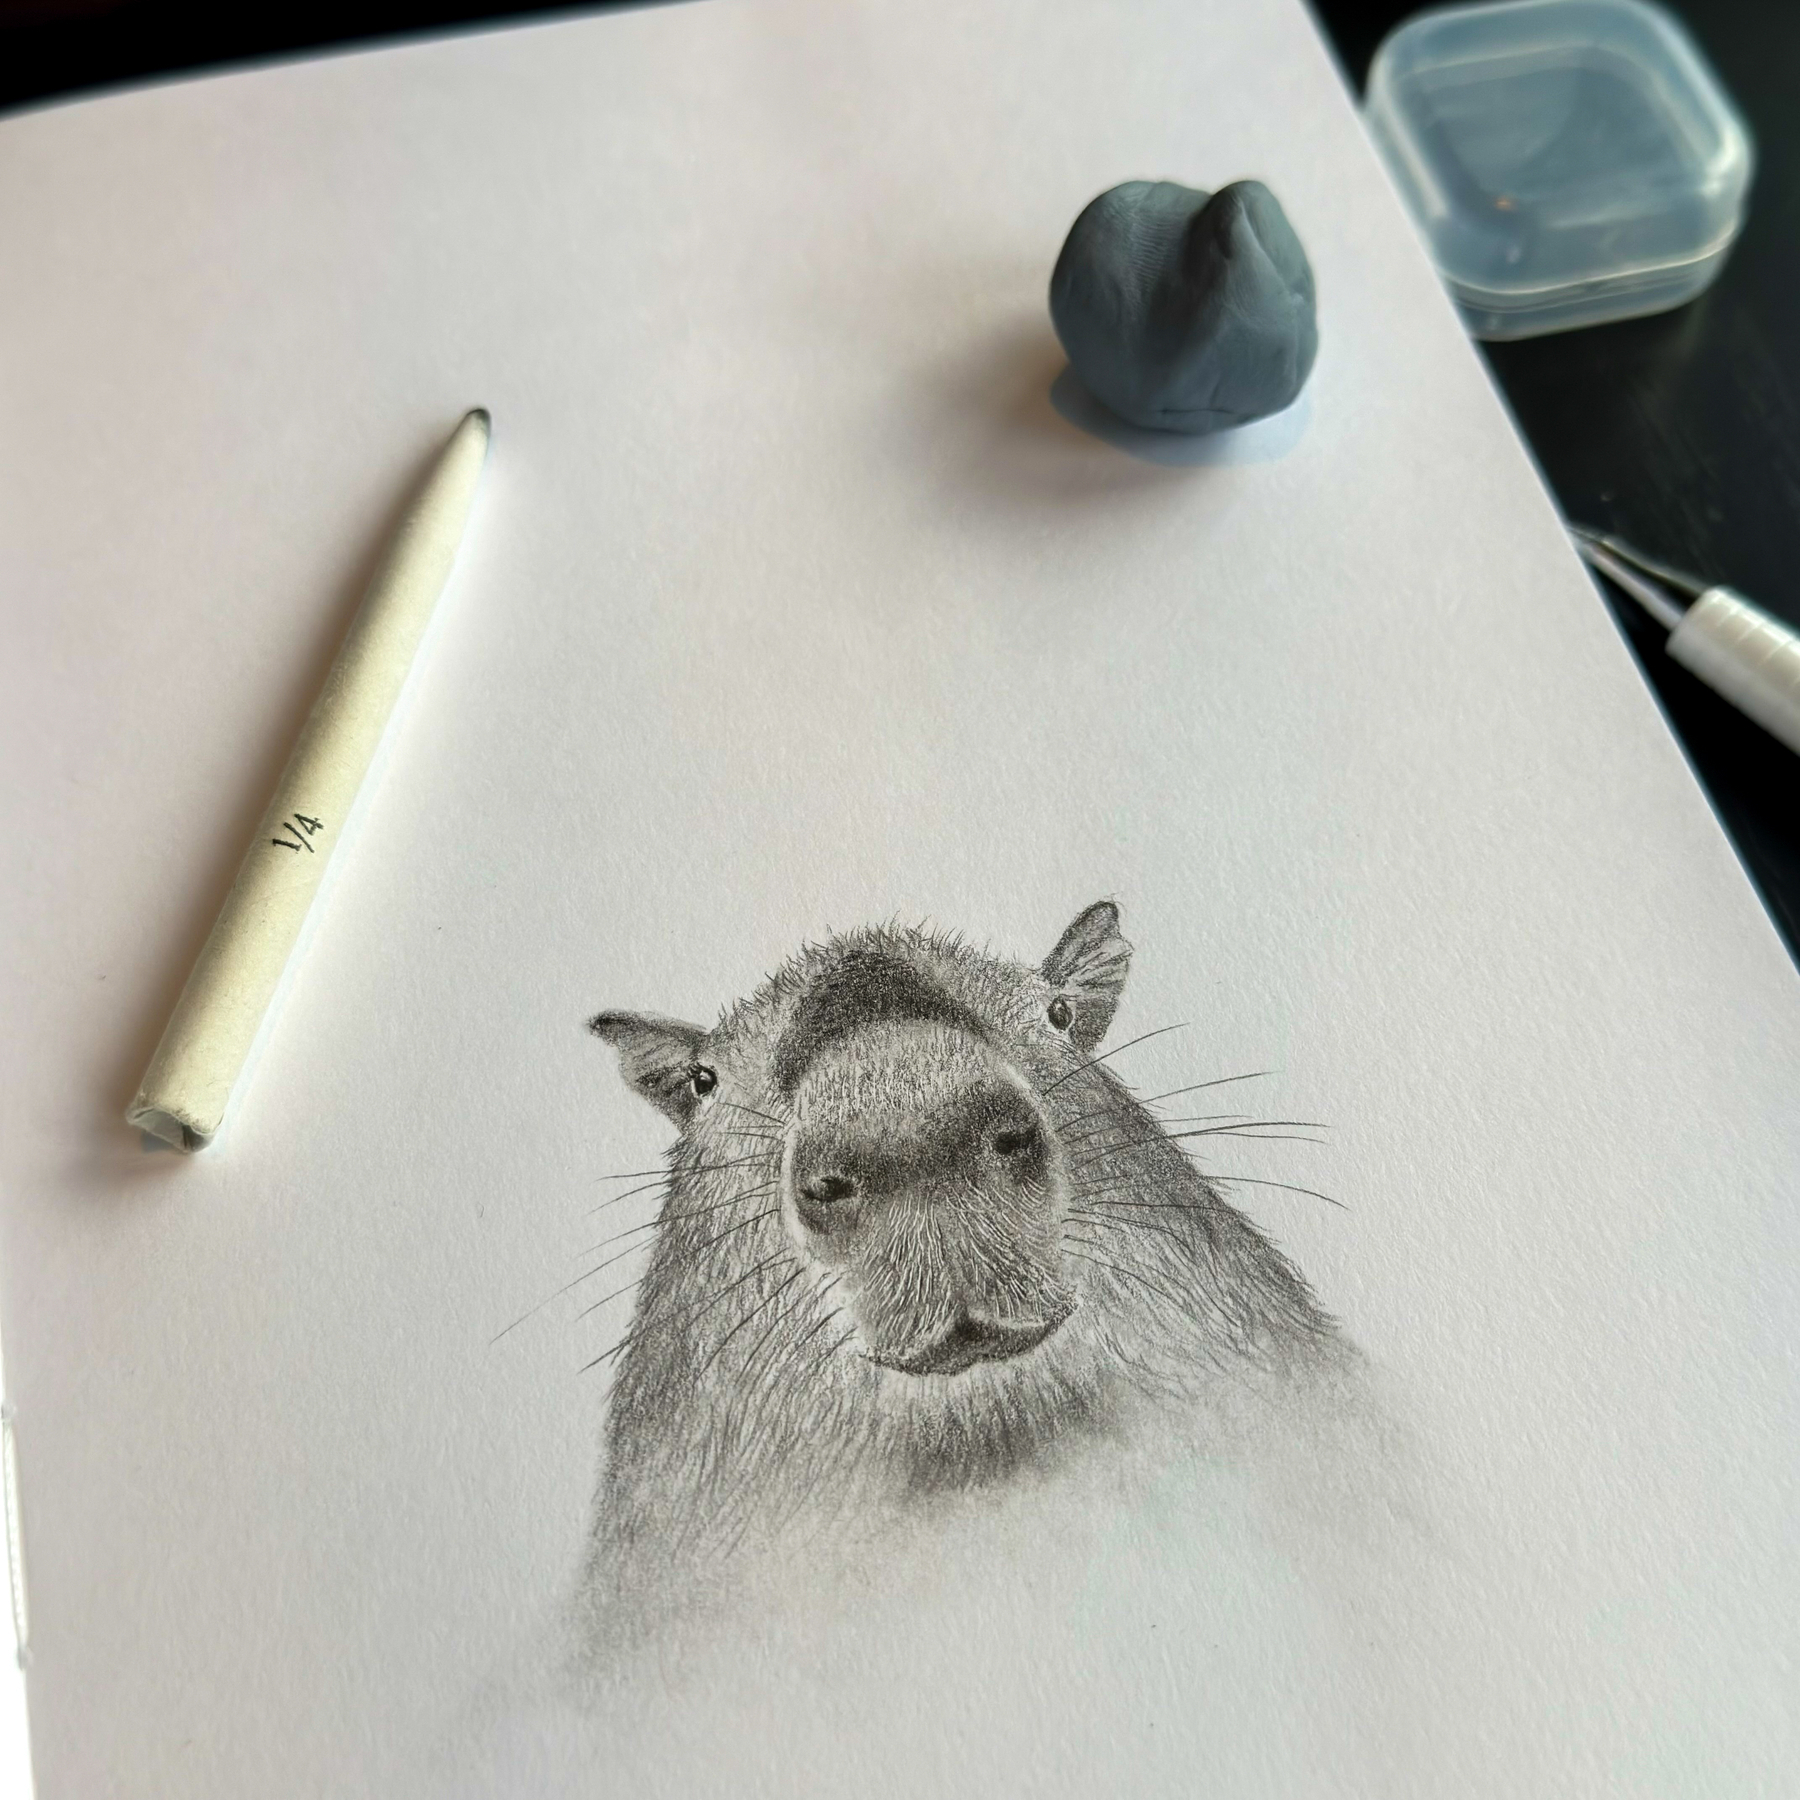 A detailed pencil sketch of a capybara on an A4 sketchbook page, accompanied by drawing tools.